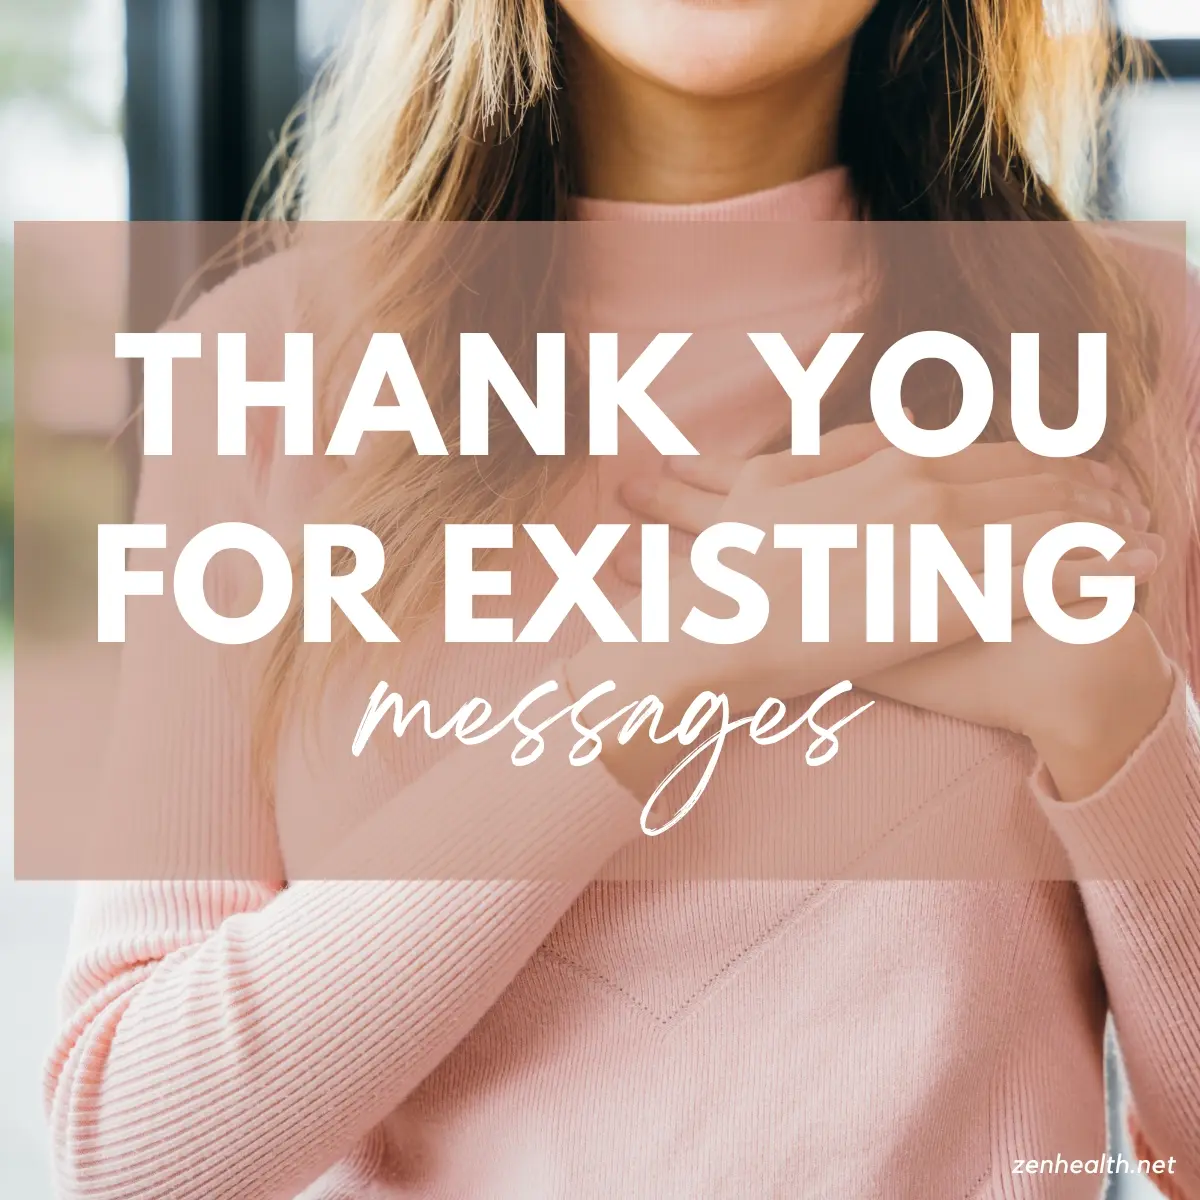 Thank you for existing messages text overlay over a photo of a woman in a pink sweater with her hands on her heart